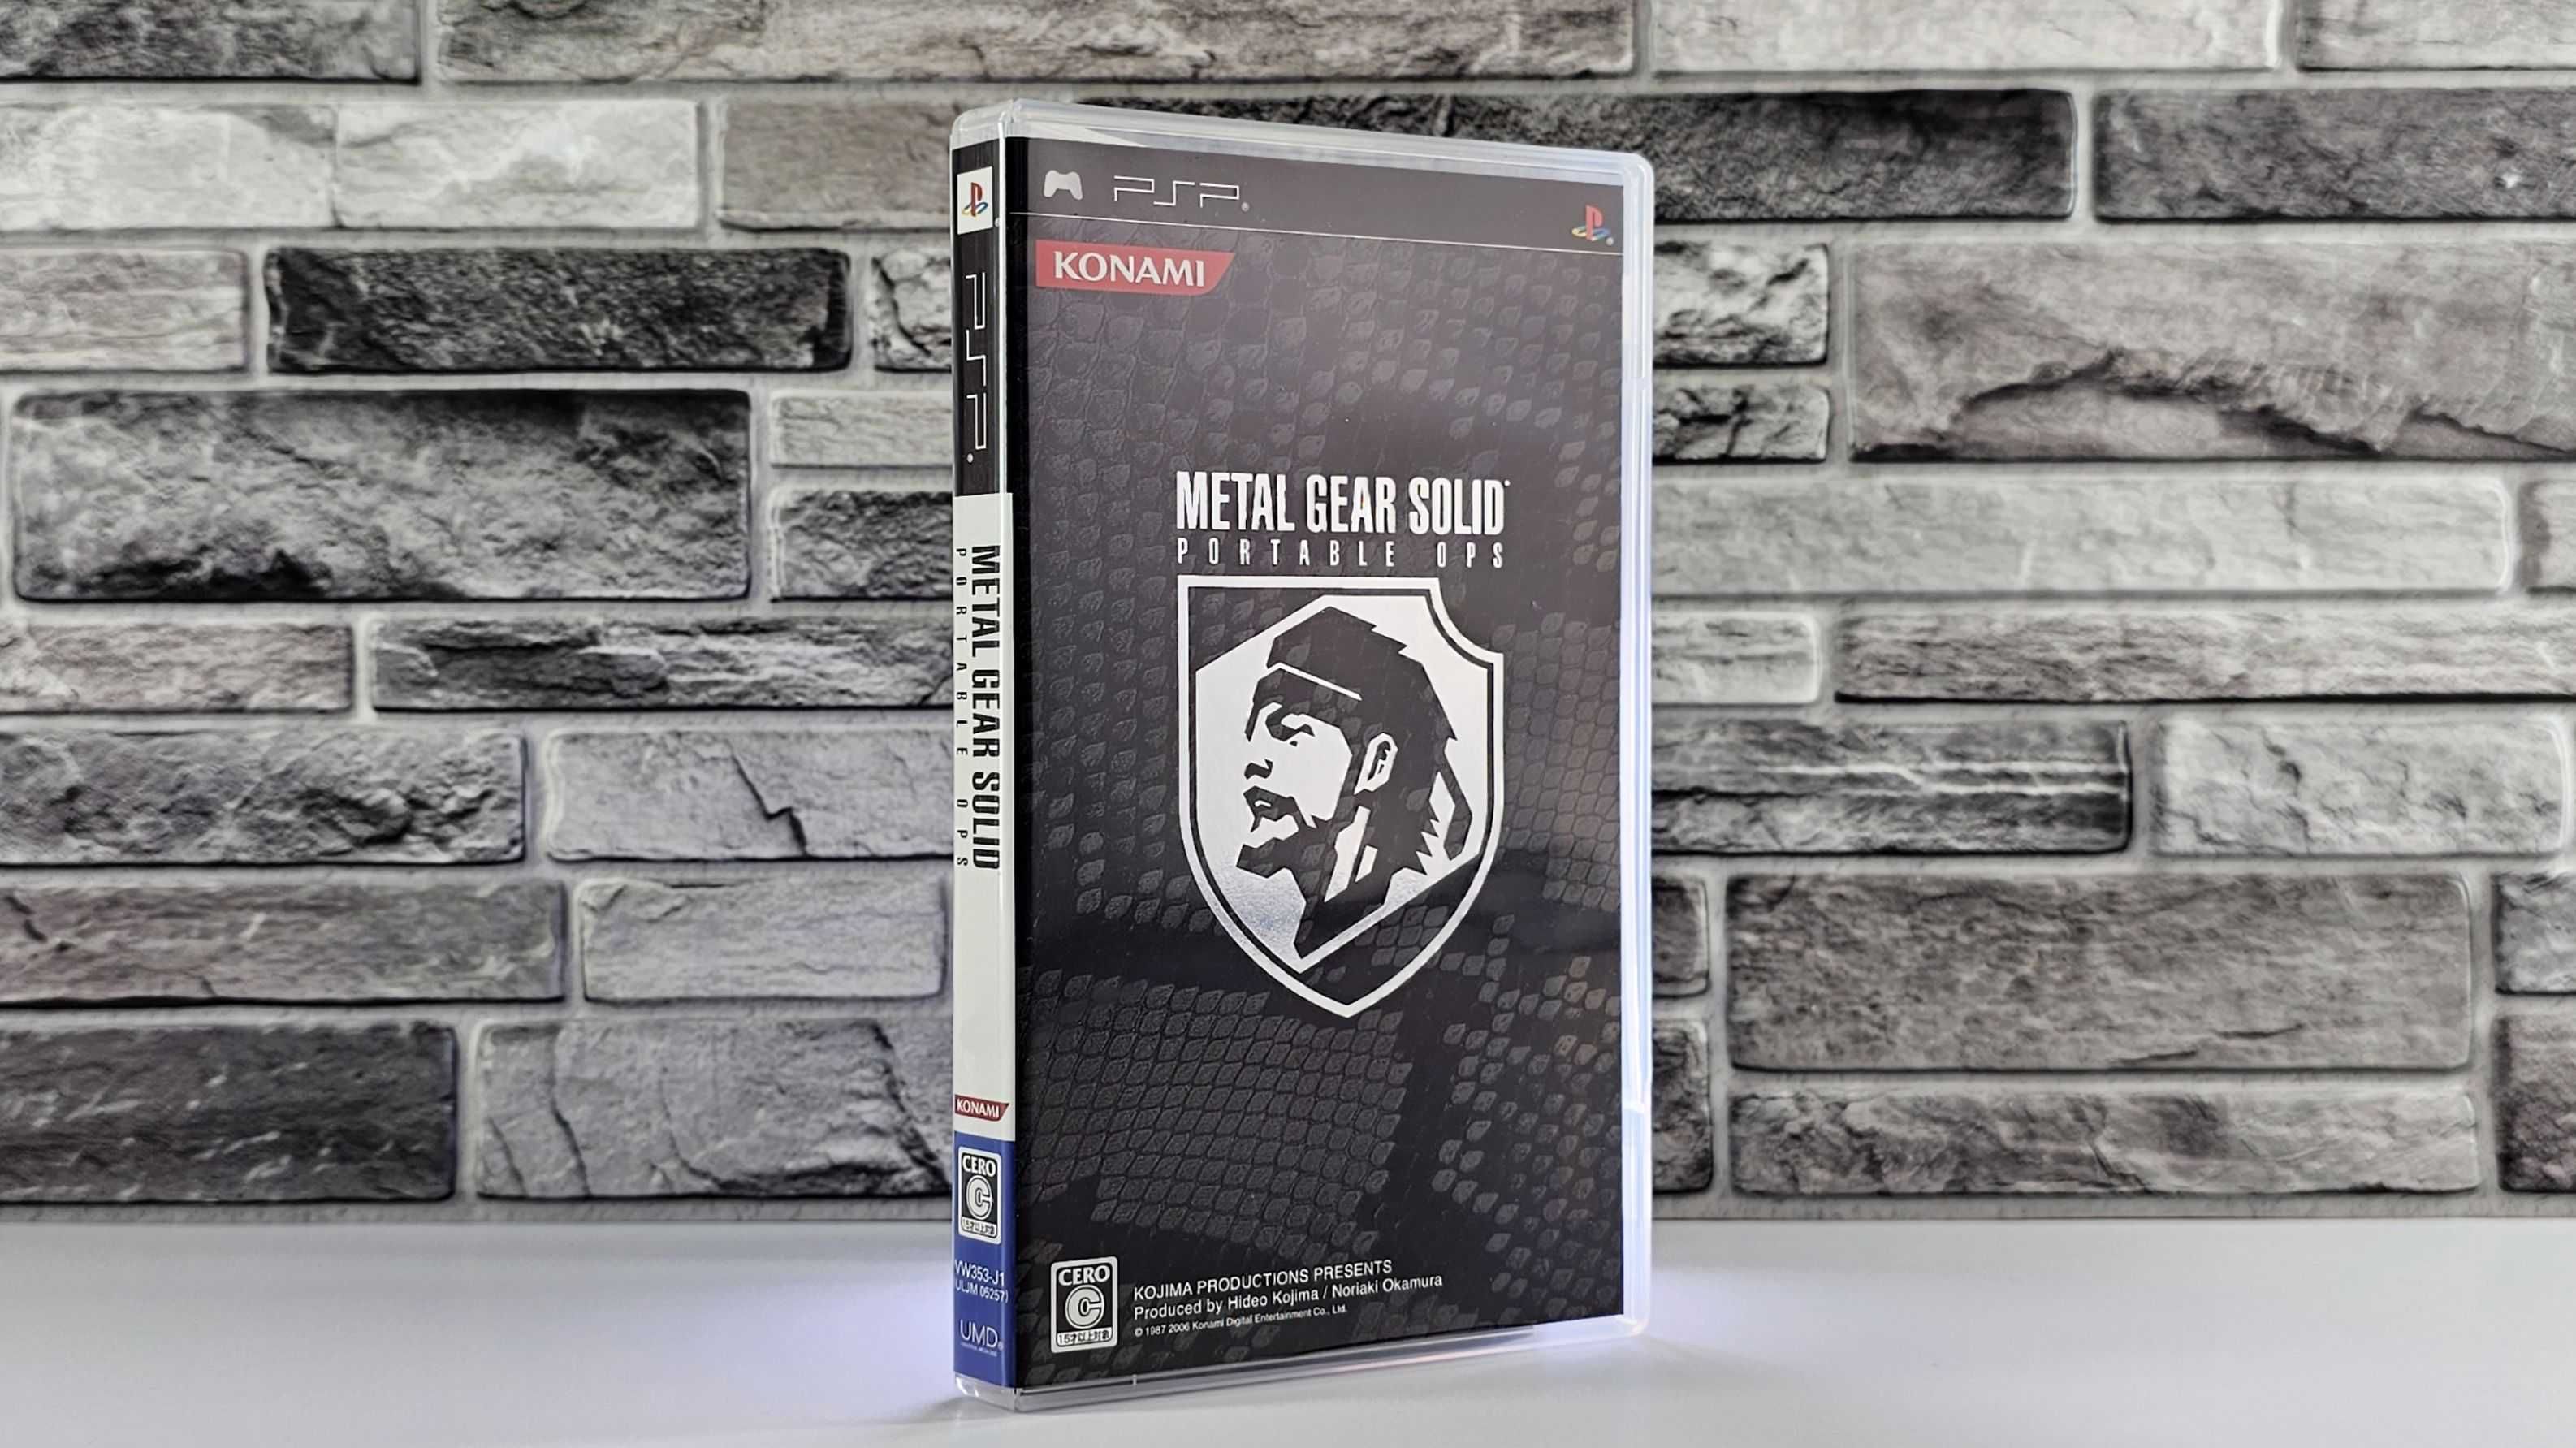 PSP Metal Gear Solid Portable OPS z edycji 20th Anniversary